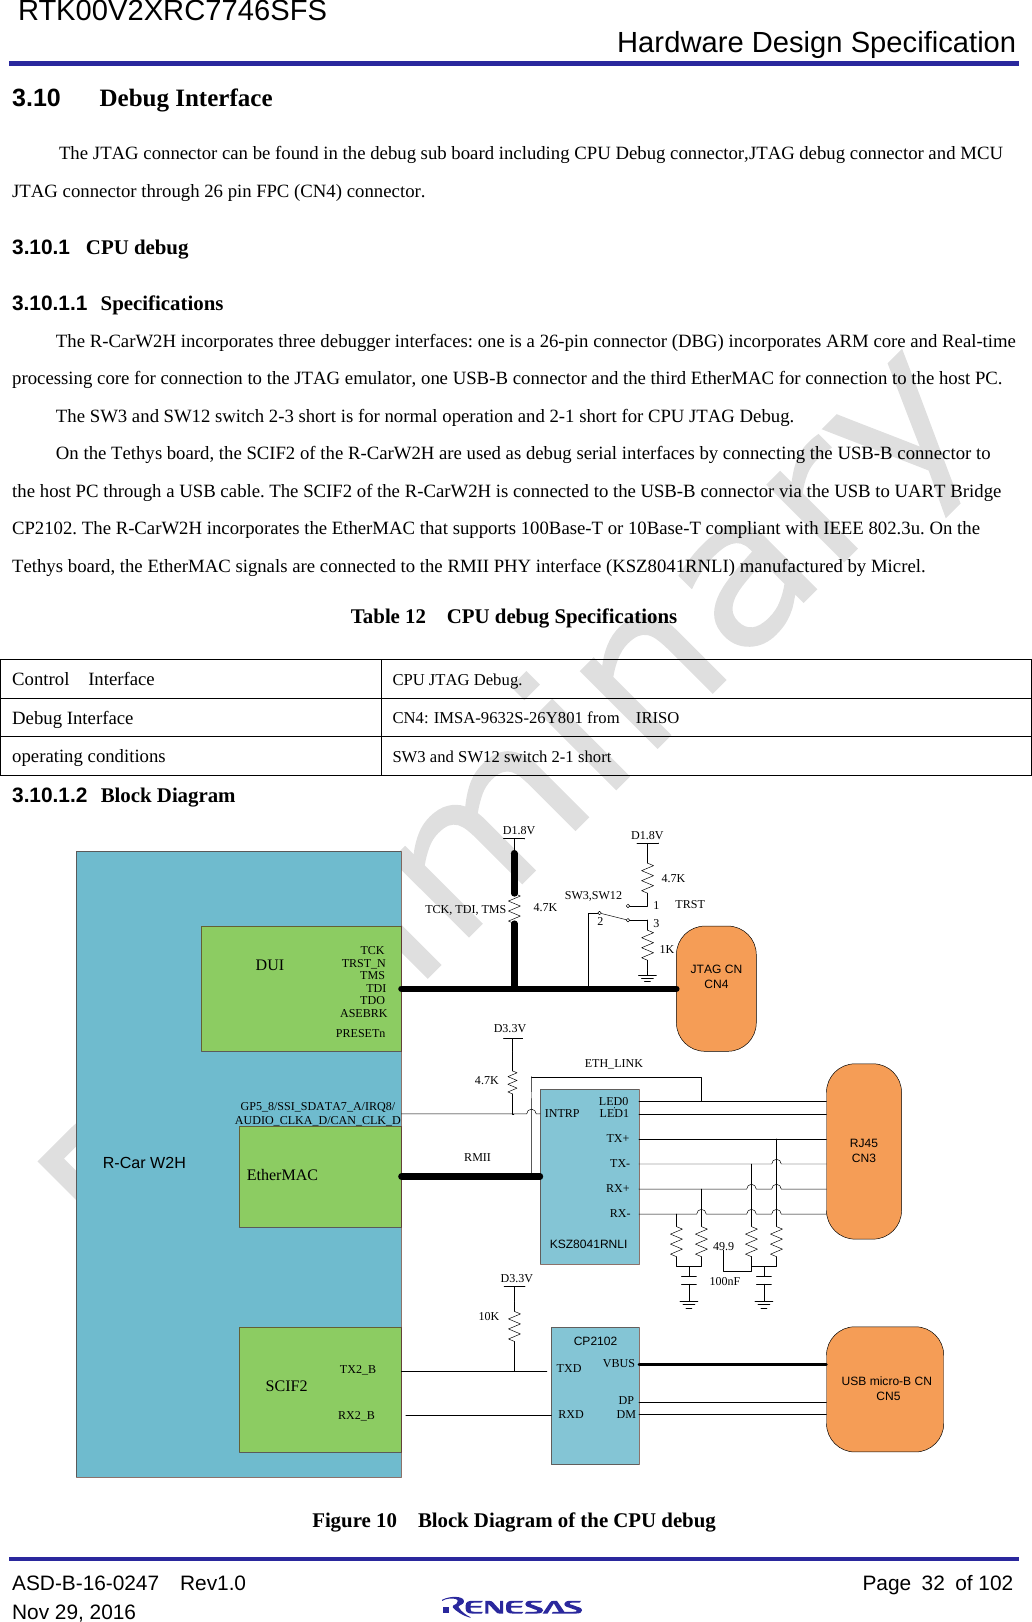  Hardware Design Specification ASD-B-16-0247  Rev1.0    Page  32 of 102 Nov 29, 2016     RTK00V2XRC7746SFS 3.10  Debug Interface The JTAG connector can be found in the debug sub board including CPU Debug connector,JTAG debug connector and MCU JTAG connector through 26 pin FPC (CN4) connector. 3.10.1 CPU debug 3.10.1.1 Specifications The R-CarW2H incorporates three debugger interfaces: one is a 26-pin connector (DBG) incorporates ARM core and Real-time processing core for connection to the JTAG emulator, one USB-B connector and the third EtherMAC for connection to the host PC. The SW3 and SW12 switch 2-3 short is for normal operation and 2-1 short for CPU JTAG Debug. On the Tethys board, the SCIF2 of the R-CarW2H are used as debug serial interfaces by connecting the USB-B connector to the host PC through a USB cable. The SCIF2 of the R-CarW2H is connected to the USB-B connector via the USB to UART Bridge CP2102. The R-CarW2H incorporates the EtherMAC that supports 100Base-T or 10Base-T compliant with IEEE 802.3u. On the Tethys board, the EtherMAC signals are connected to the RMII PHY interface (KSZ8041RNLI) manufactured by Micrel. Table 12  CPU debug Specifications Control  Interface CPU JTAG Debug. Debug Interface CN4: IMSA-9632S-26Y801 from   IRISO operating conditions SW3 and SW12 switch 2-1 short 3.10.1.2 Block Diagram R-Car W2HD1.8VTCK, TDI, TMSJTAG CNCN449.9DUITCKTRST_NTDITMSTDOASEBRKPRESETnEtherMACINTRPRMIID3.3VTX-TX+RX+RX-100nFLED1LED0ETH_LINKRJ45CN3KSZ8041RNLIDPDMRXDTXD VBUSUSB micro-B CN CN5SCIF2TX2_BRX2_BD3.3V10K4.7KCP2102GP5_8/SSI_SDATA7_A/IRQ8/AUDIO_CLKA_D/CAN_CLK_DD1.8VTRST4.7K4.7K1K213SW3,SW12 Figure 10  Block Diagram of the CPU debug 